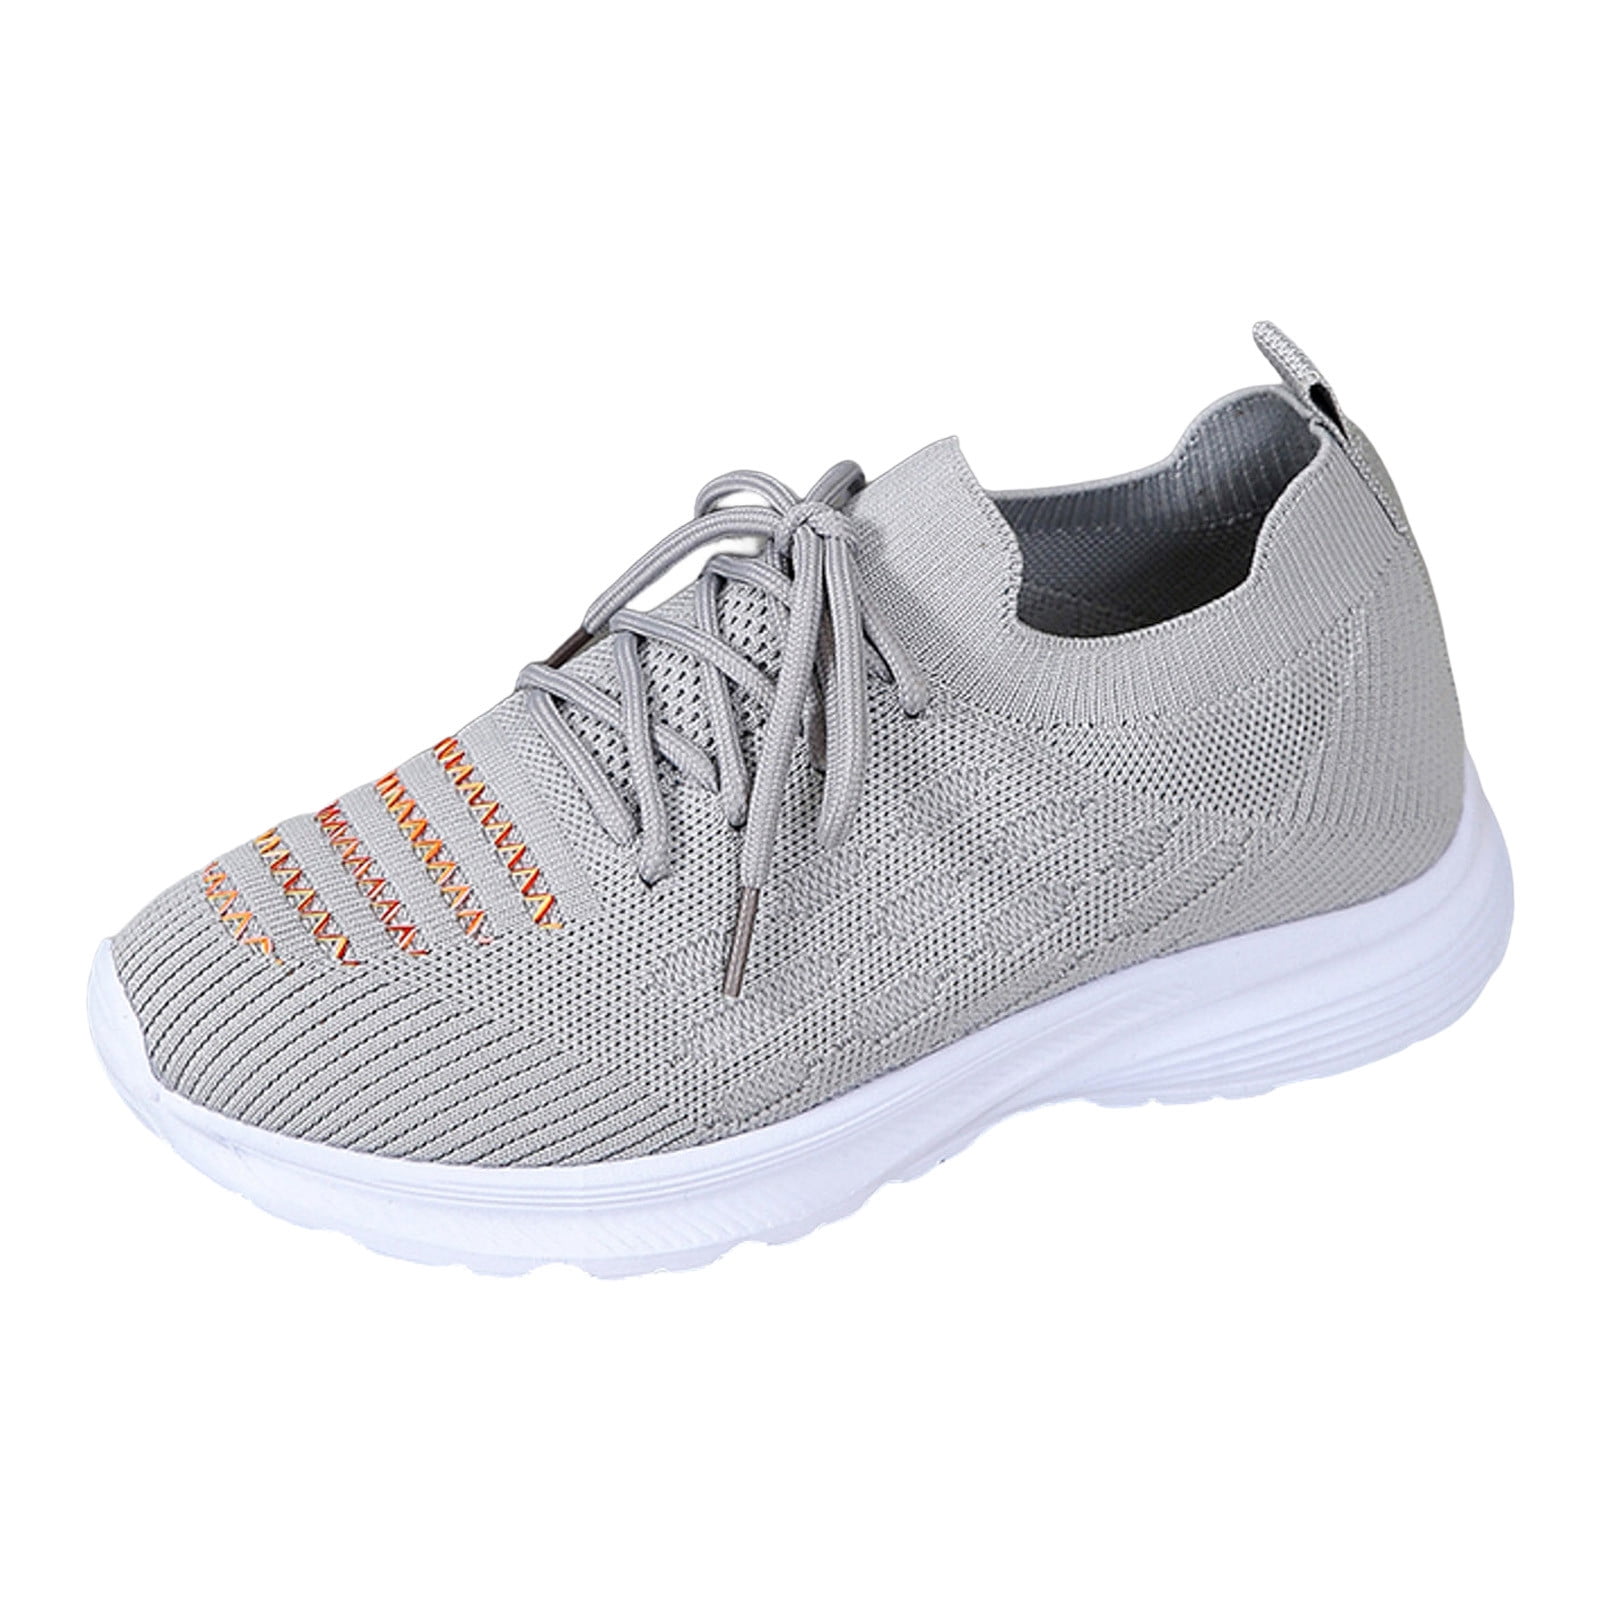 GYUJNB Women's Wide Toe Box Road Running Shoes | Wide Athletic Tennis ...